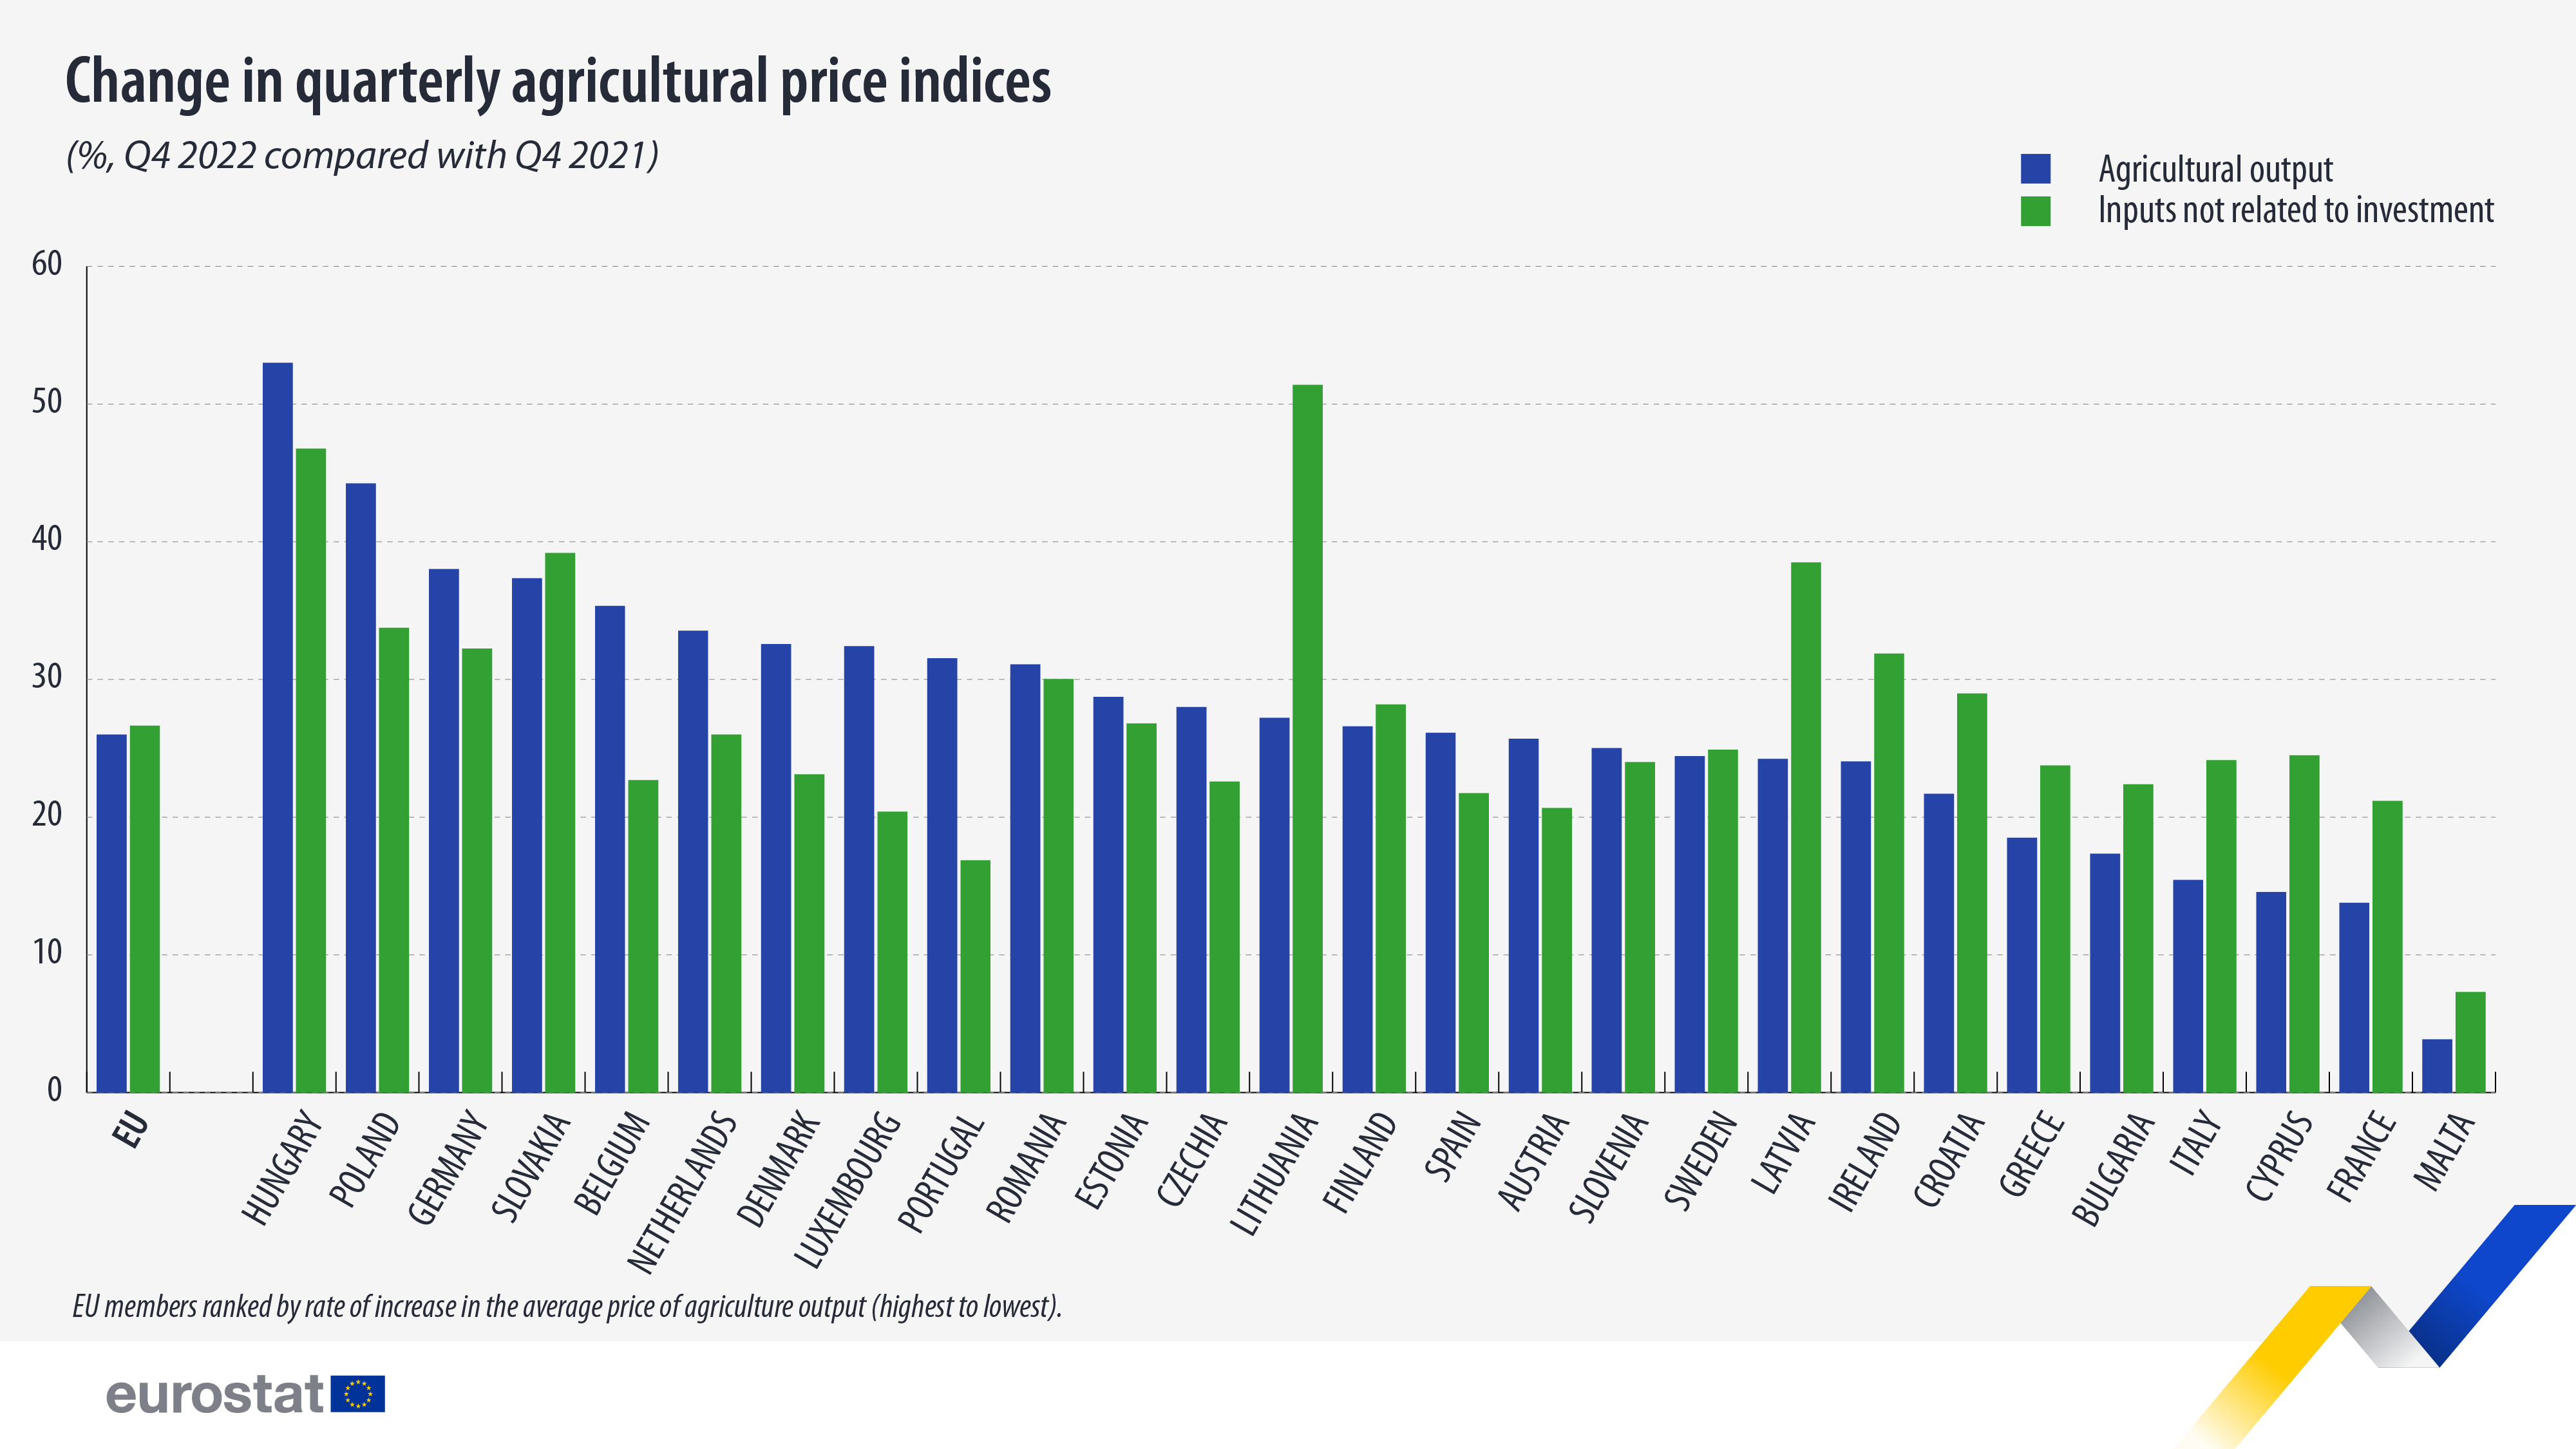 Bar chart: Change in Quarterly agricultural price indices, %, Q4 2022 compared with Q4 2021